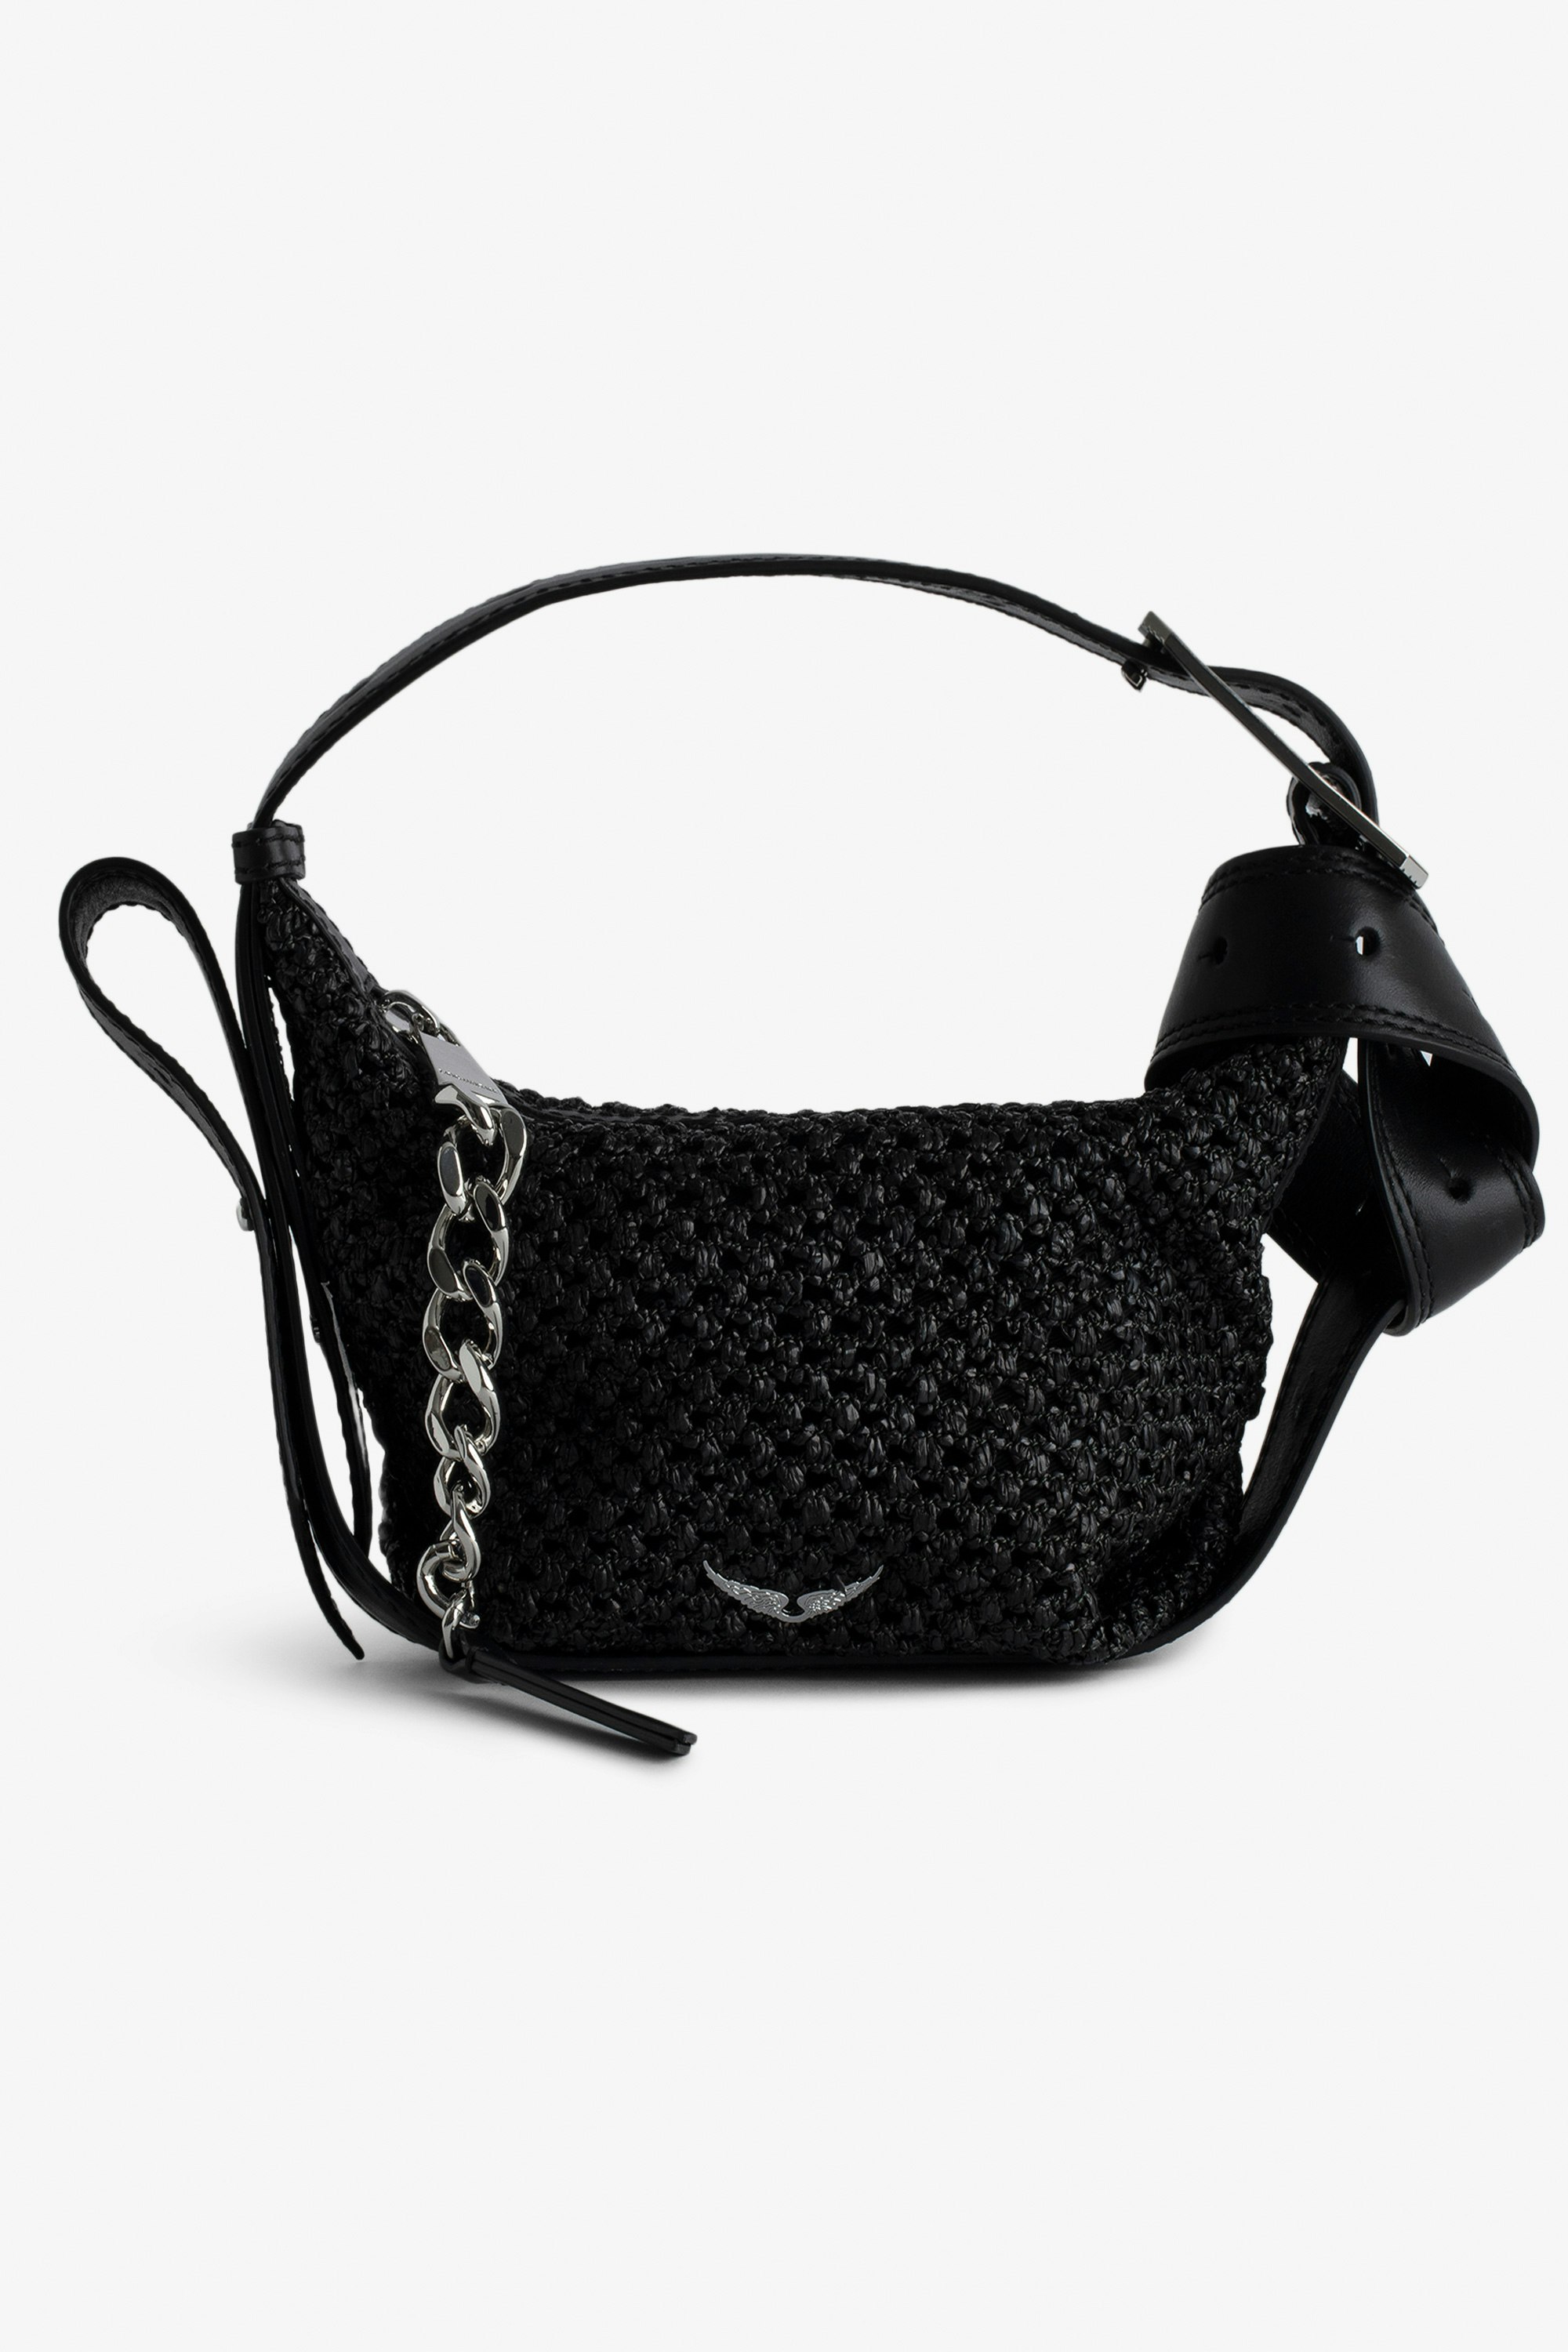 Le Cecilia XS Bag - Small black basket-style bag with leather shoulder strap and metallic C buckle.